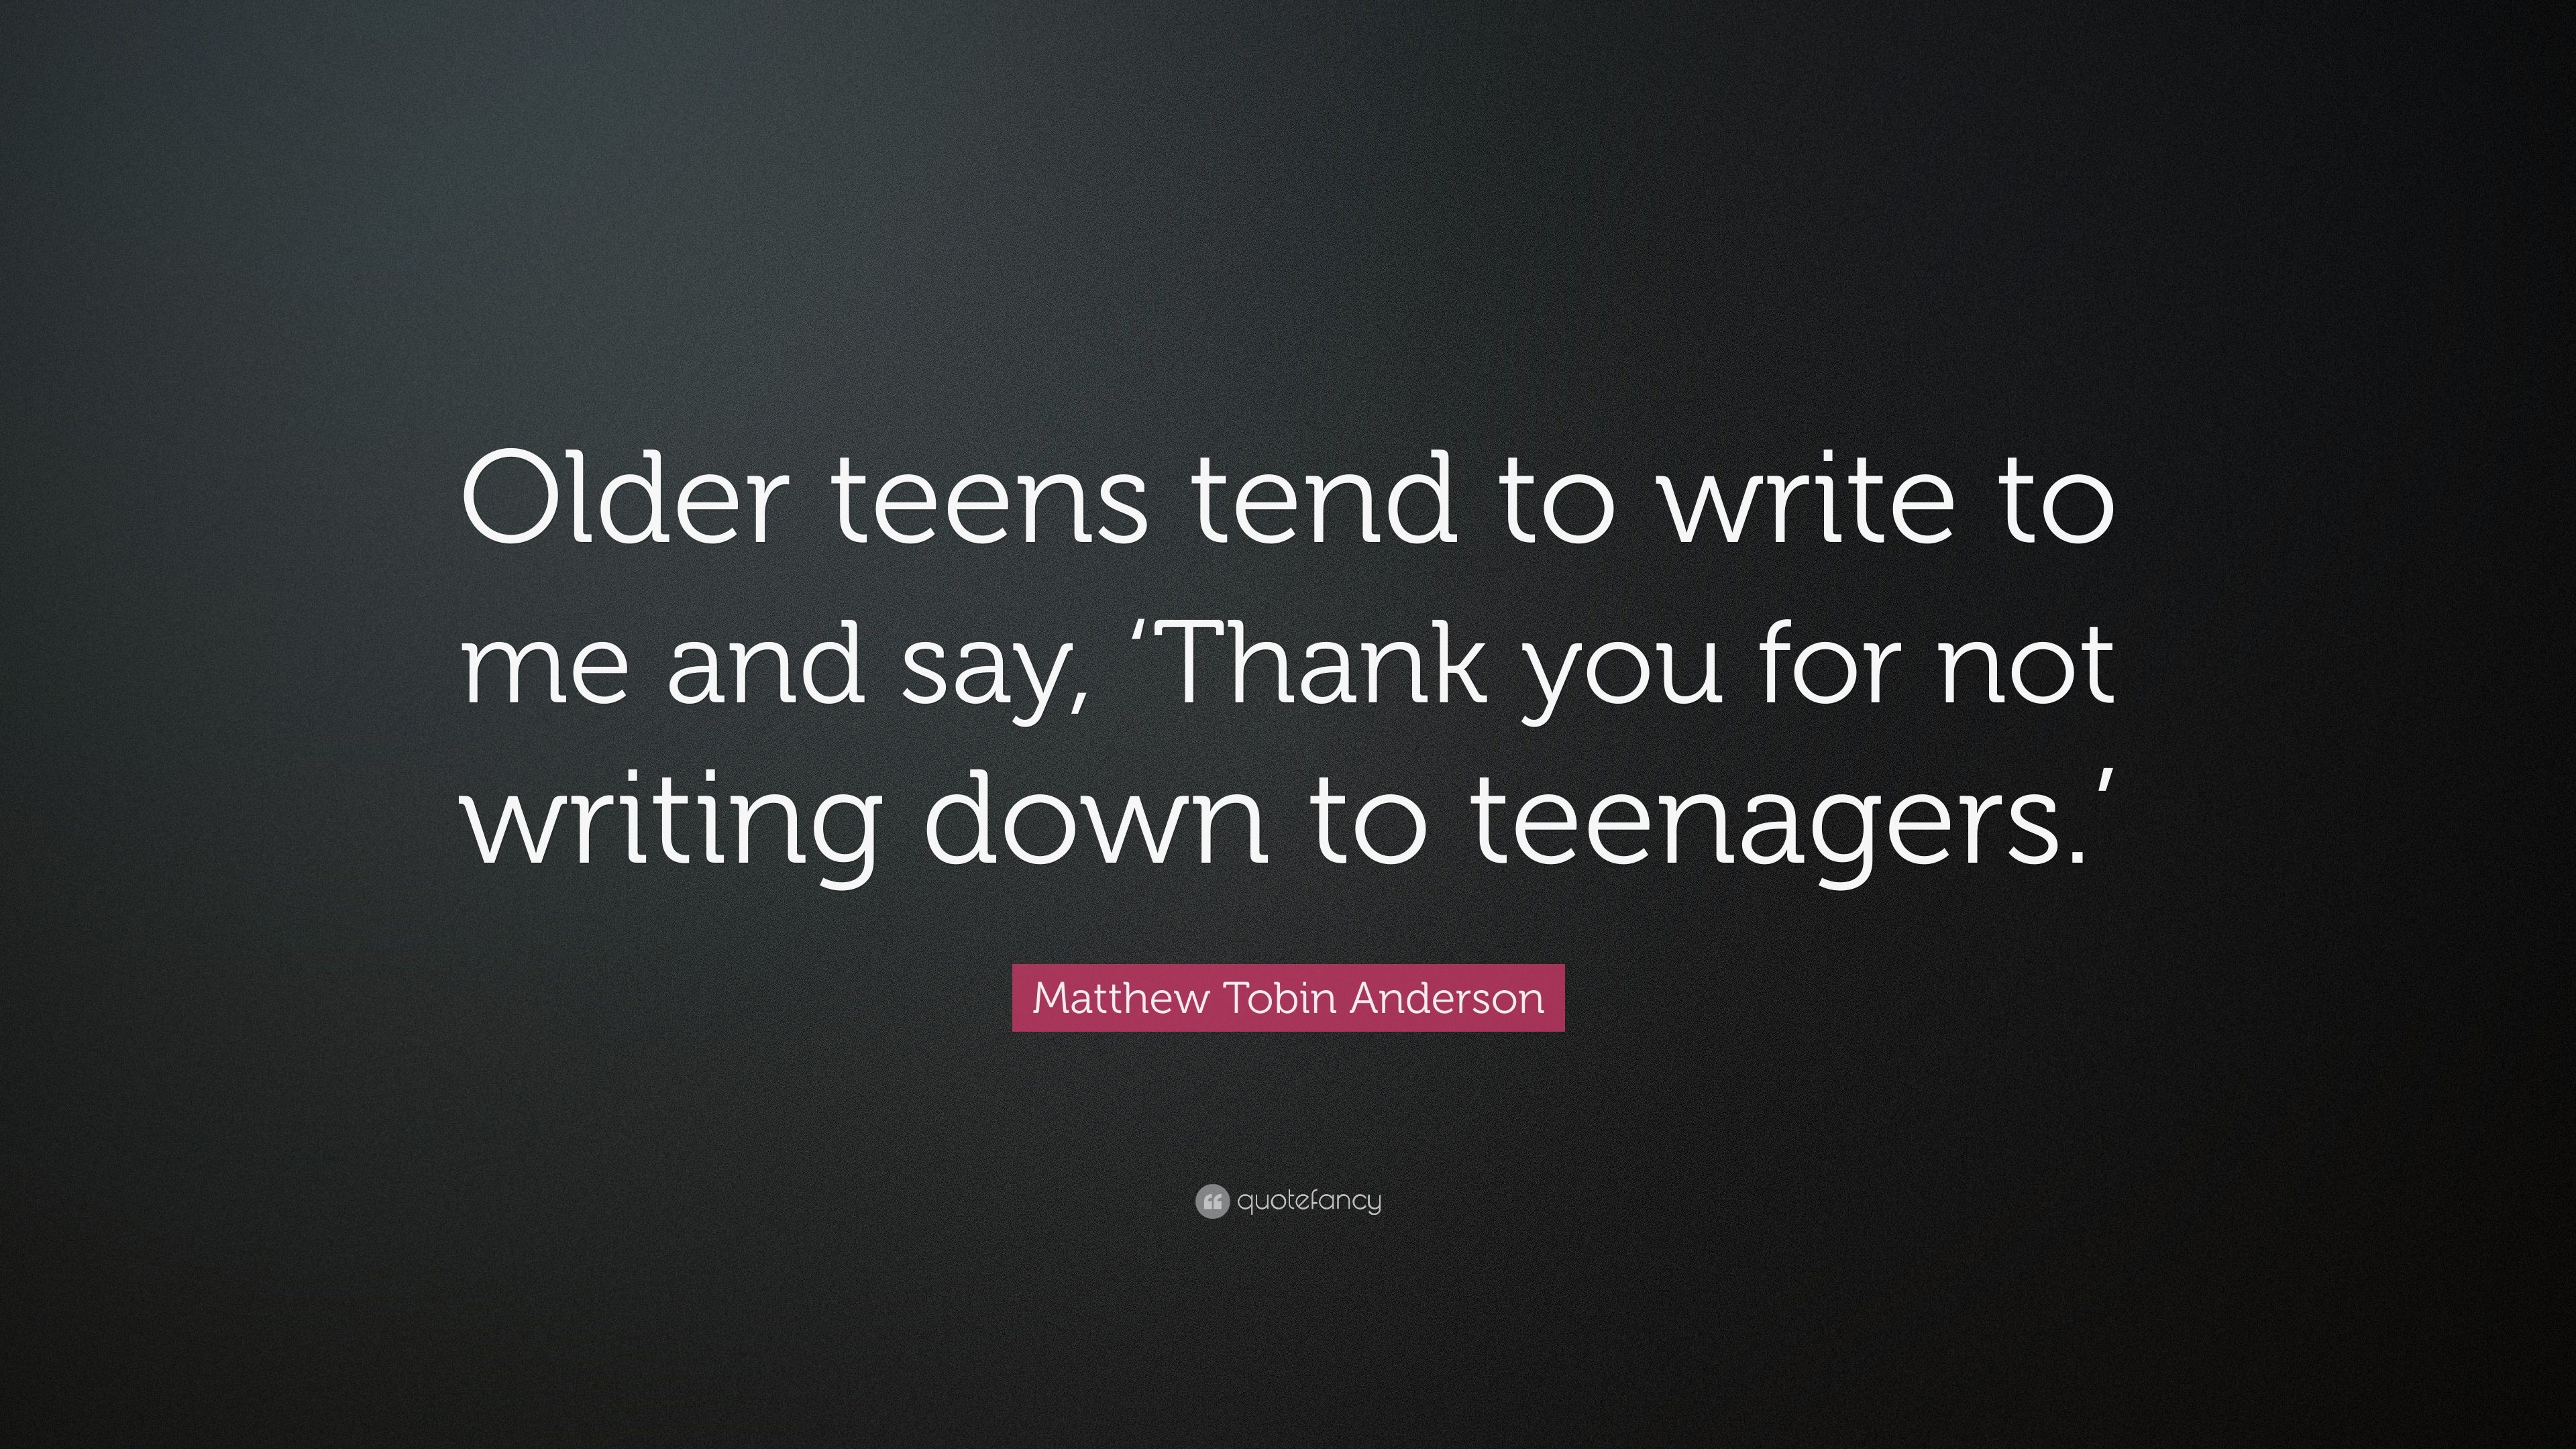 Matthew Tobin Anderson Quote: “Older teens tend to write to me